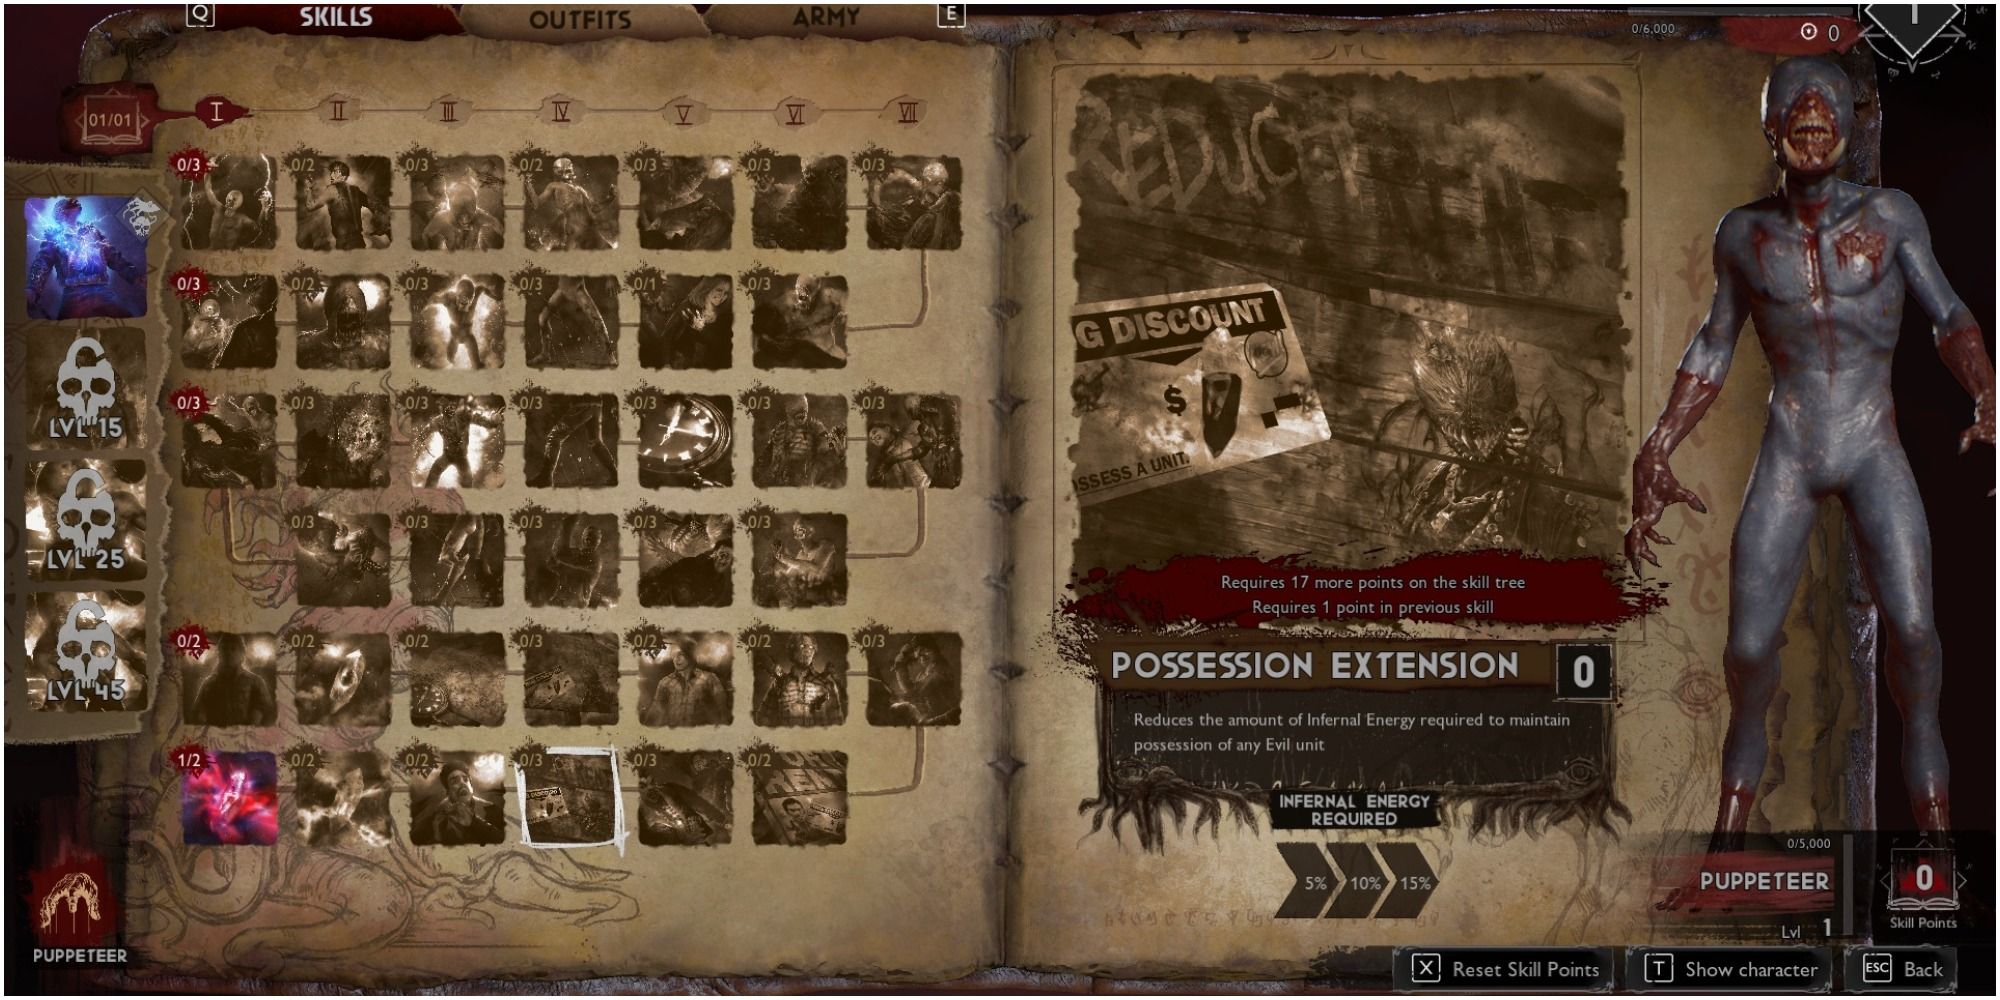 Evil Dead The Game Puppeteer Skill Possession Extension Description